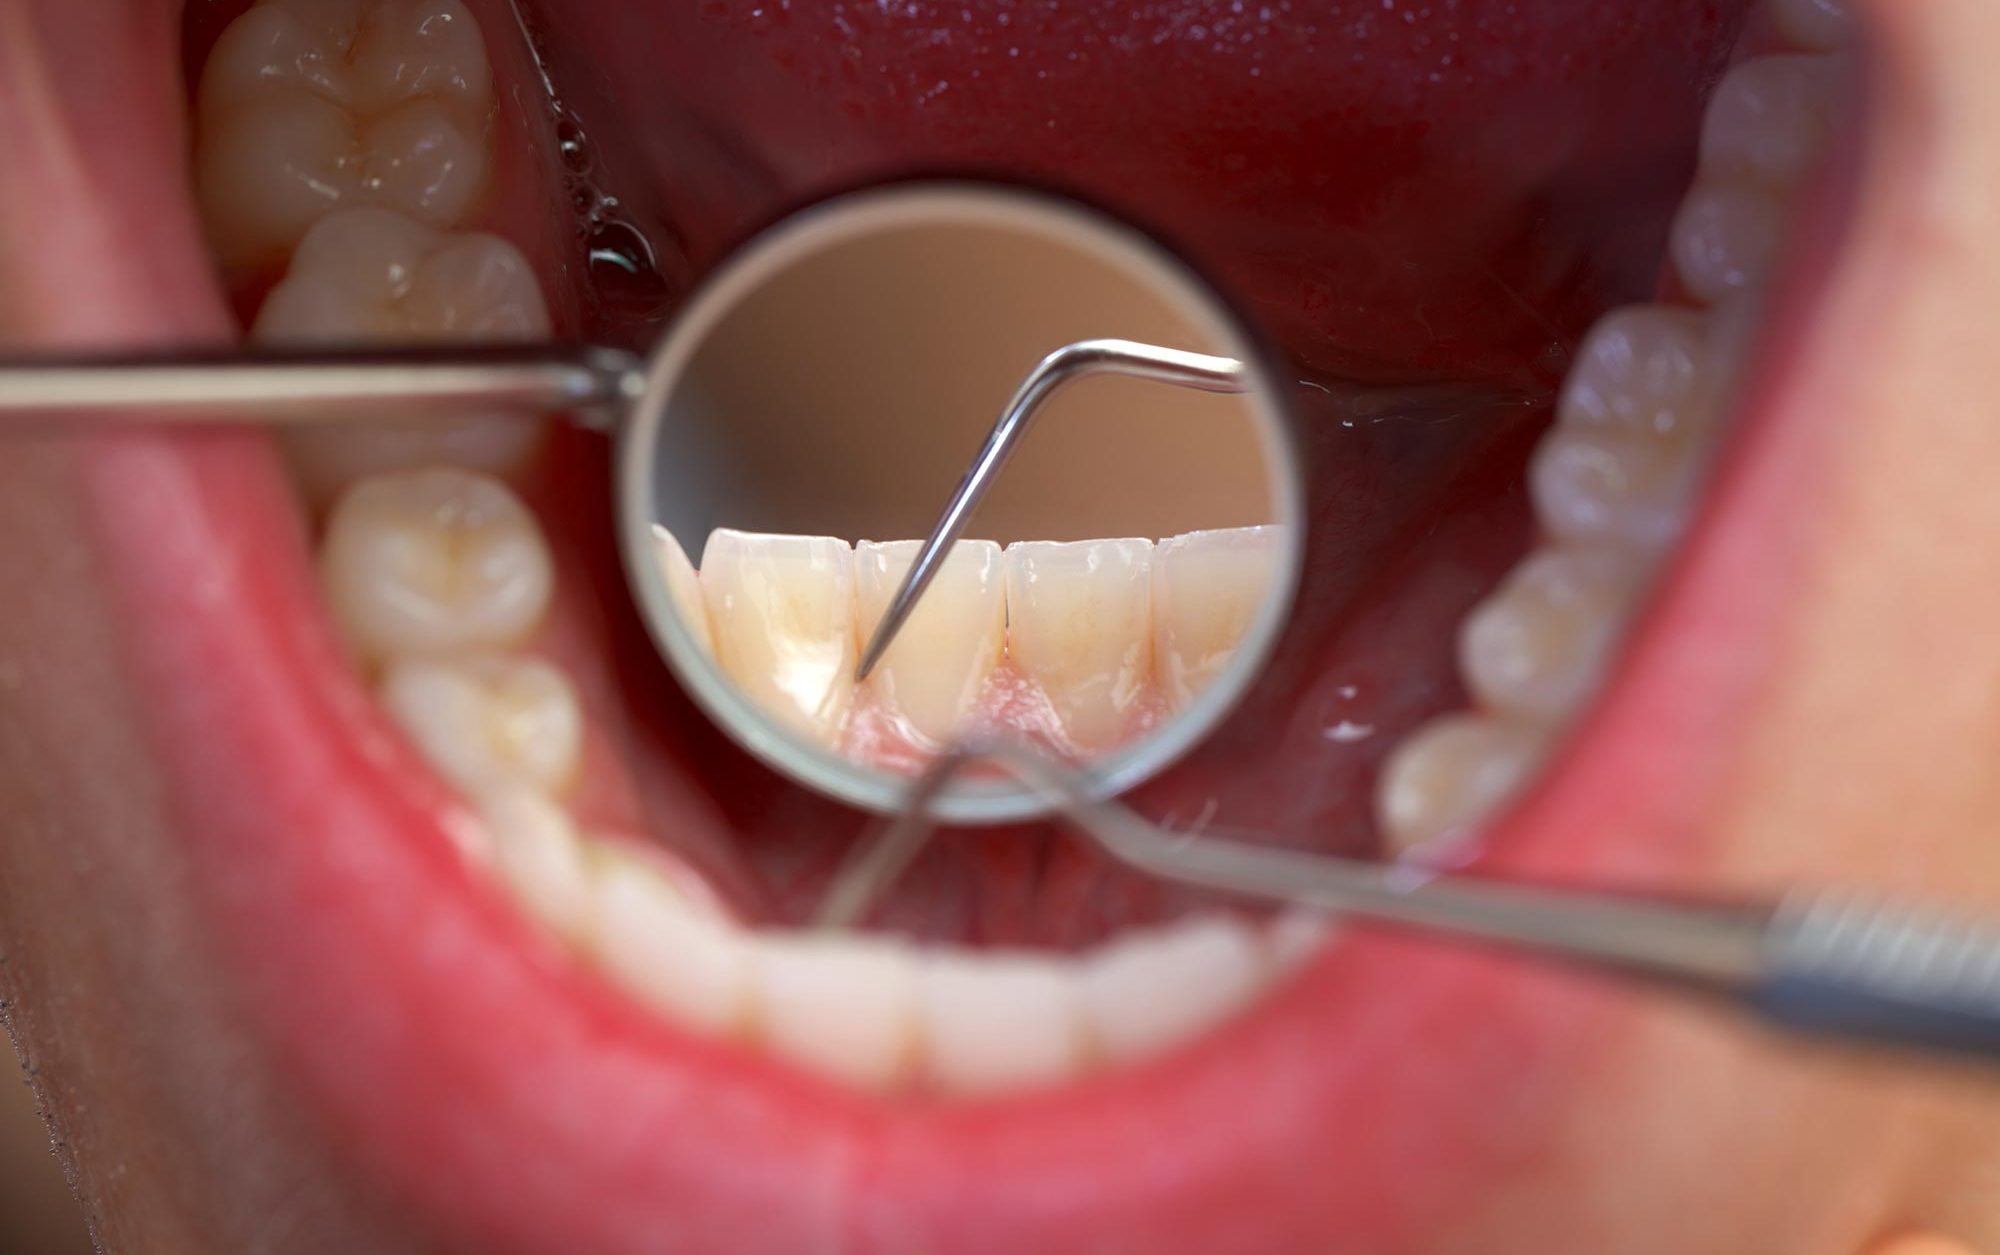 erosive tooth wear third most common oral health disease